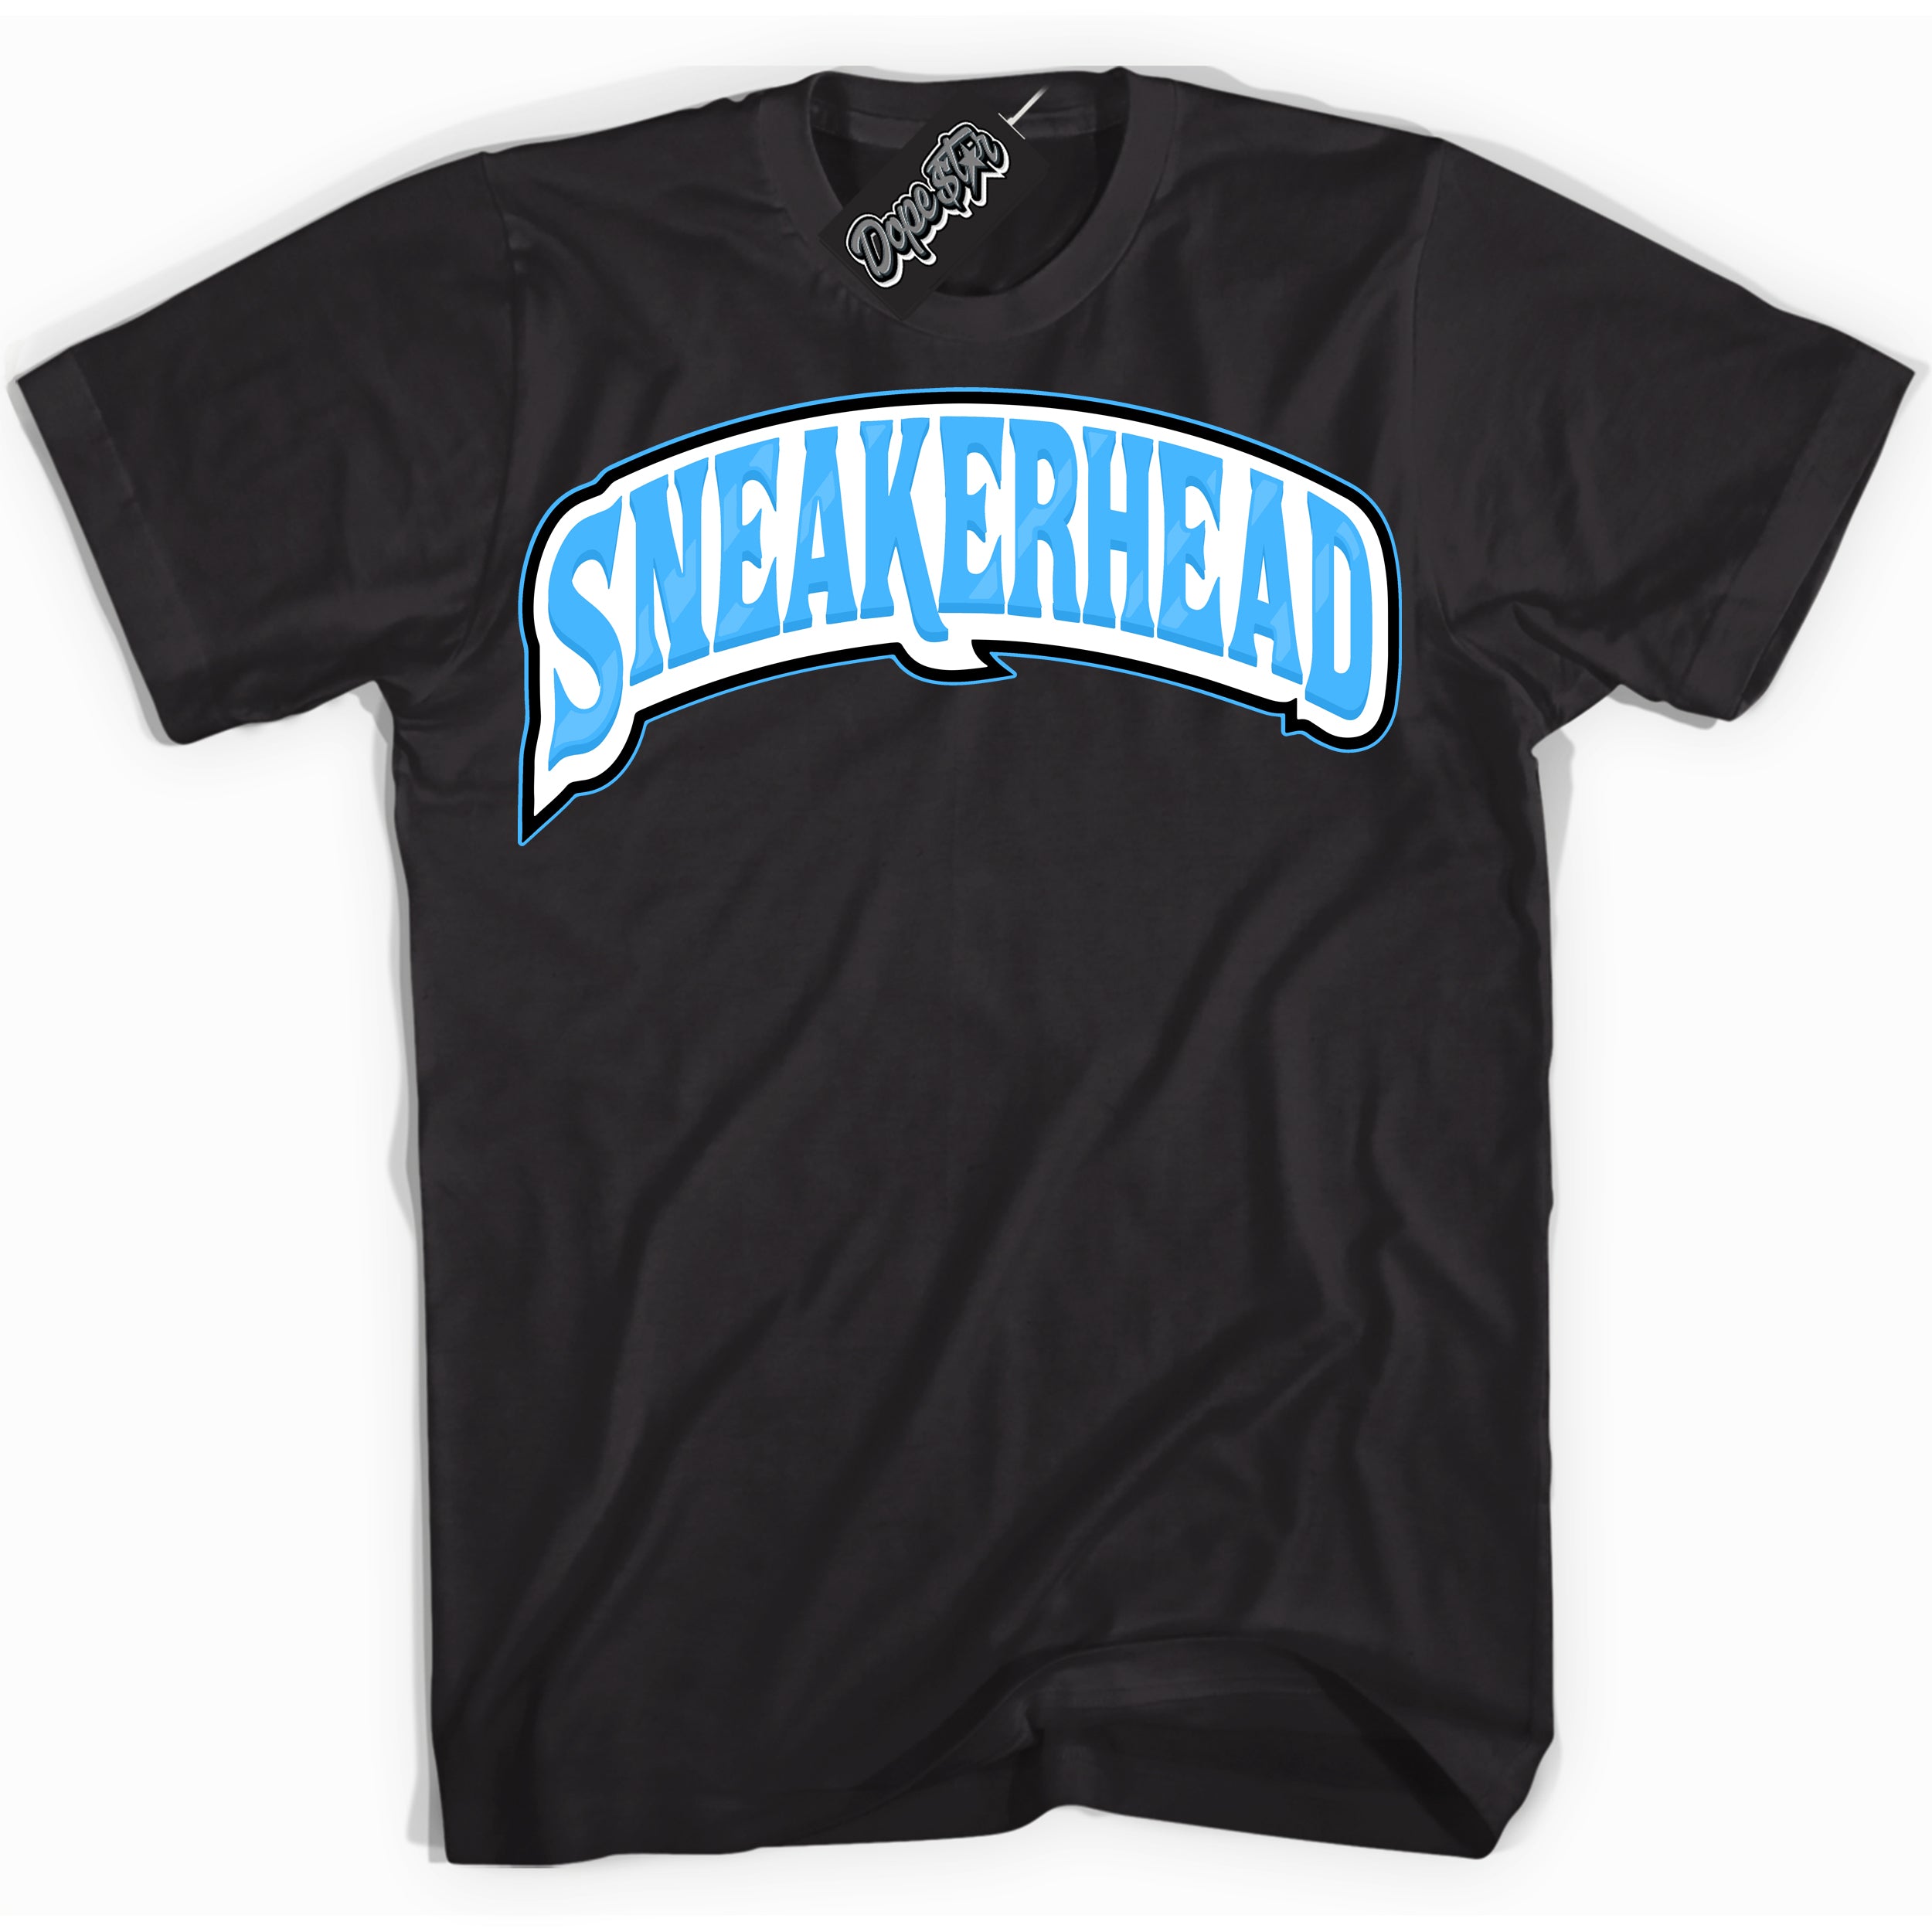 Cool Black graphic tee with “ Sneakerhead” design, that perfectly matches Powder Blue 9s sneakers 